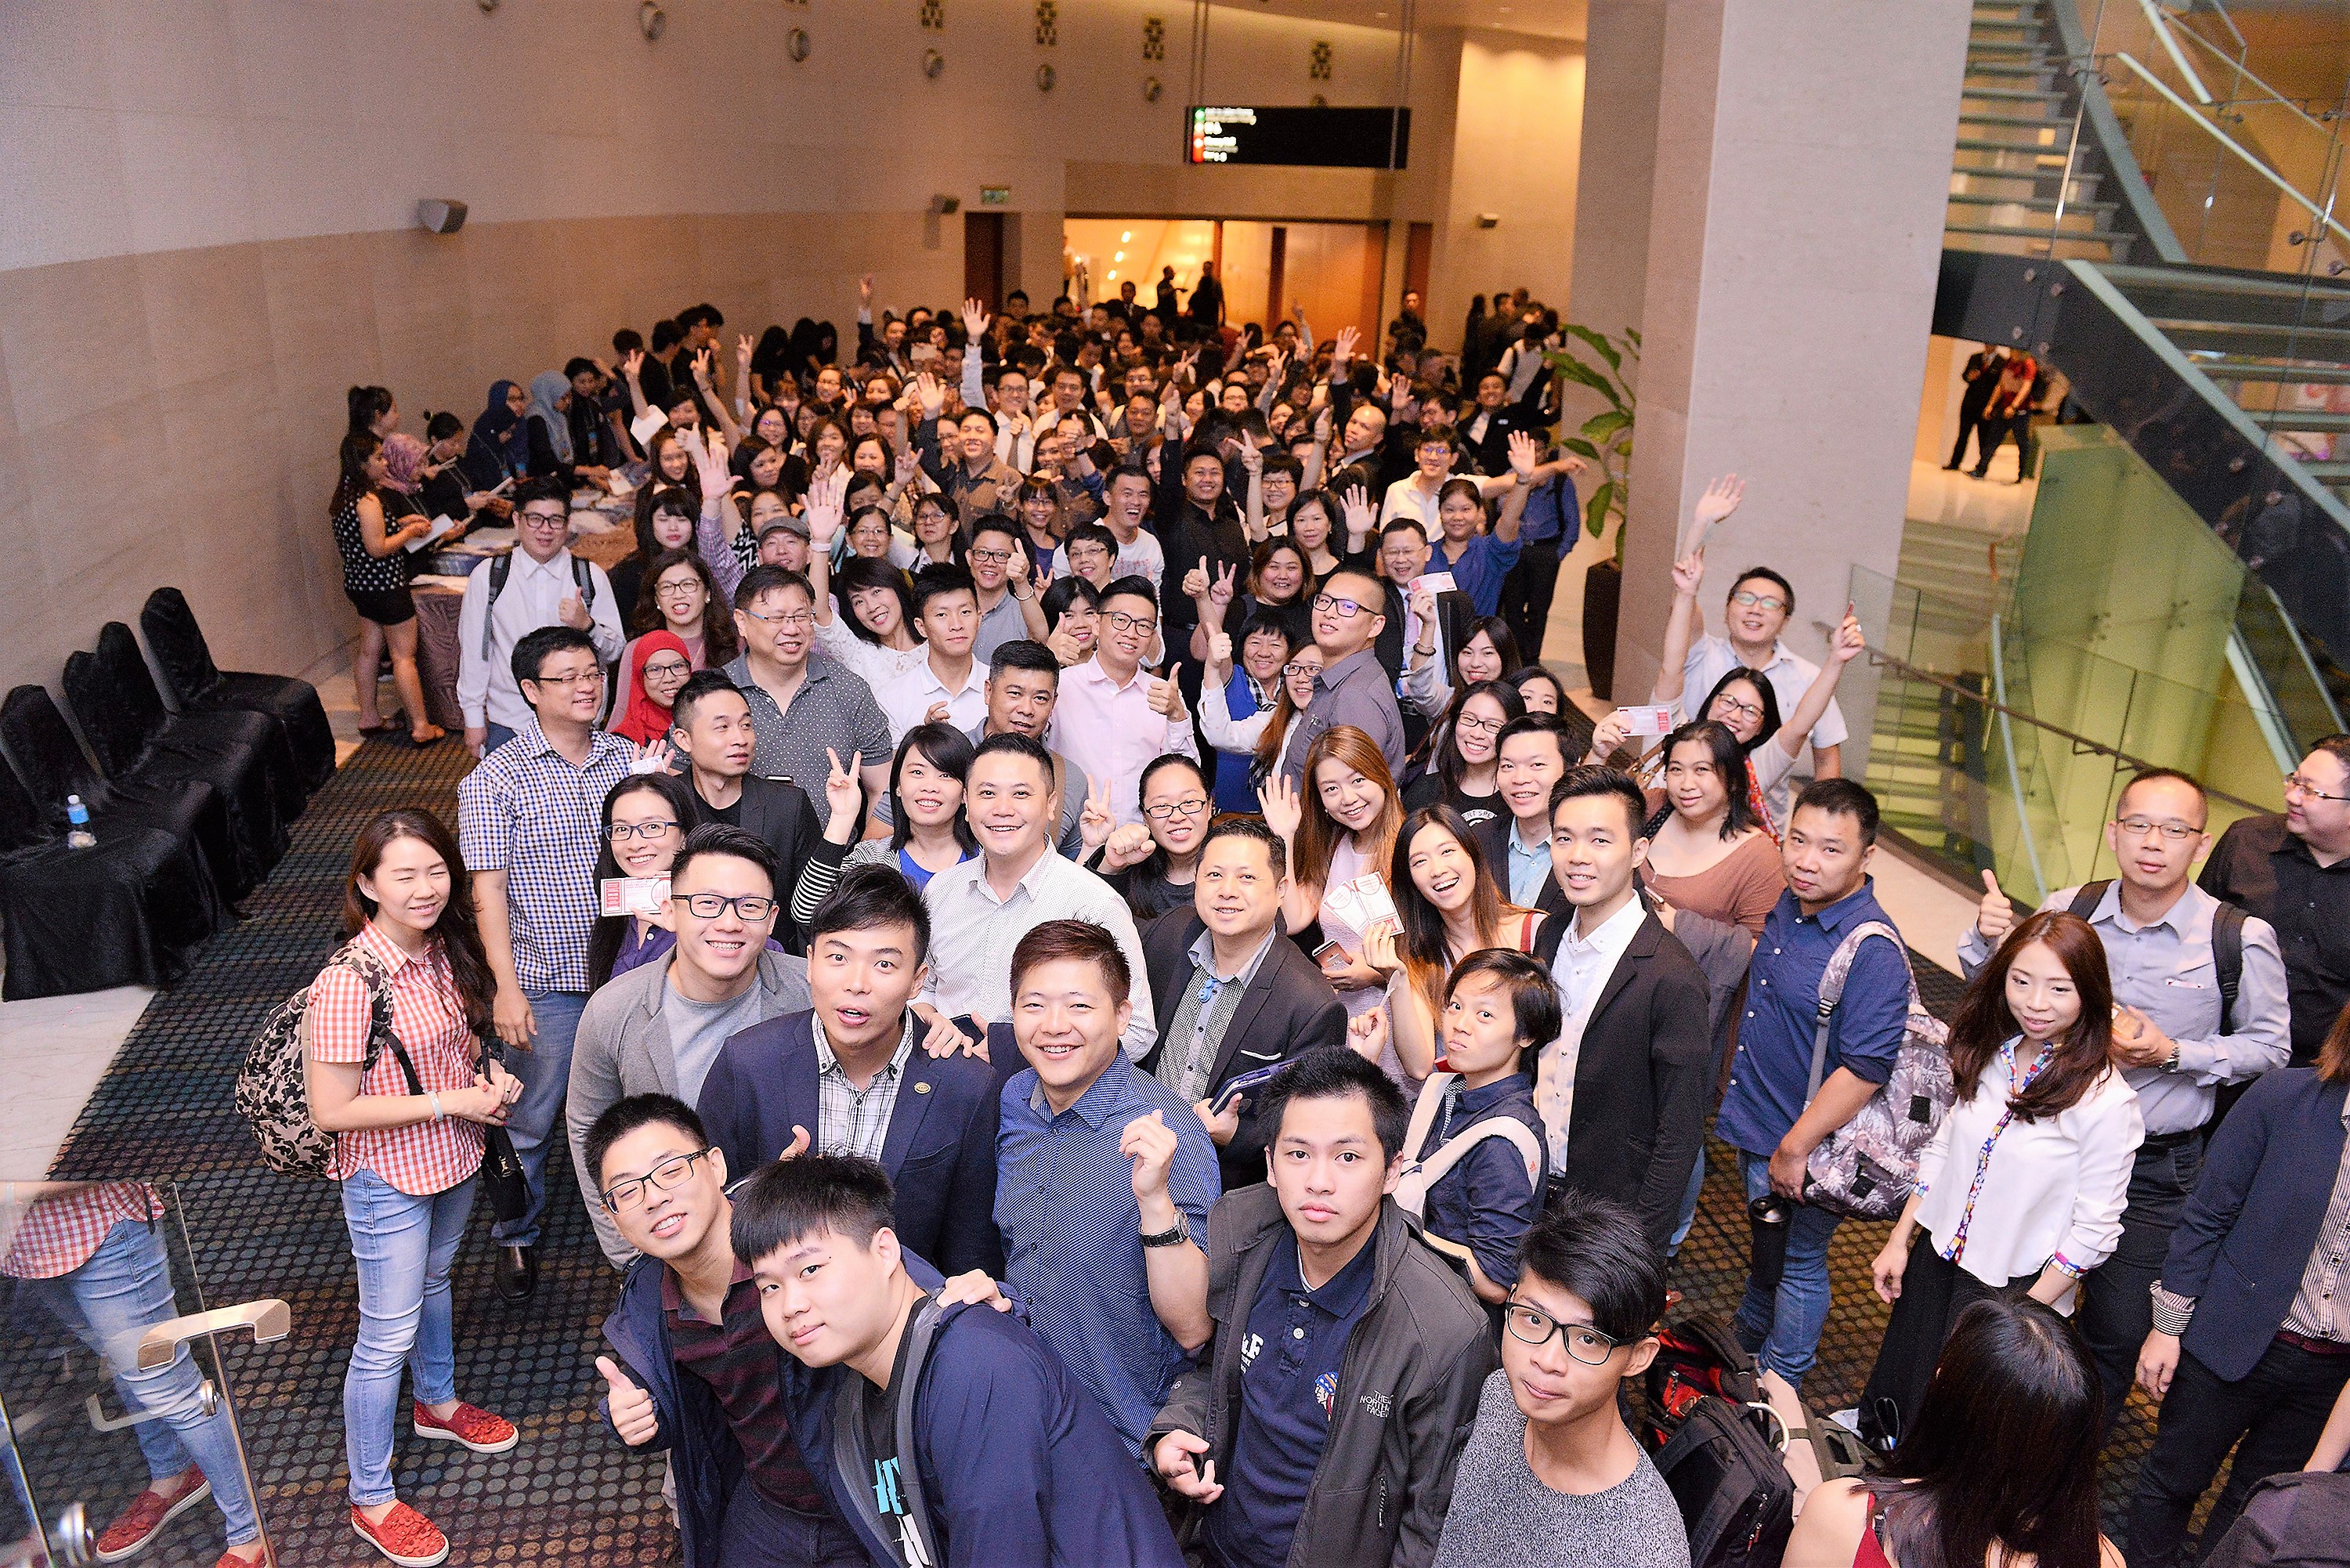 Just some of the more than 6,000 attendees at the Market Malaysia Grand Opening.